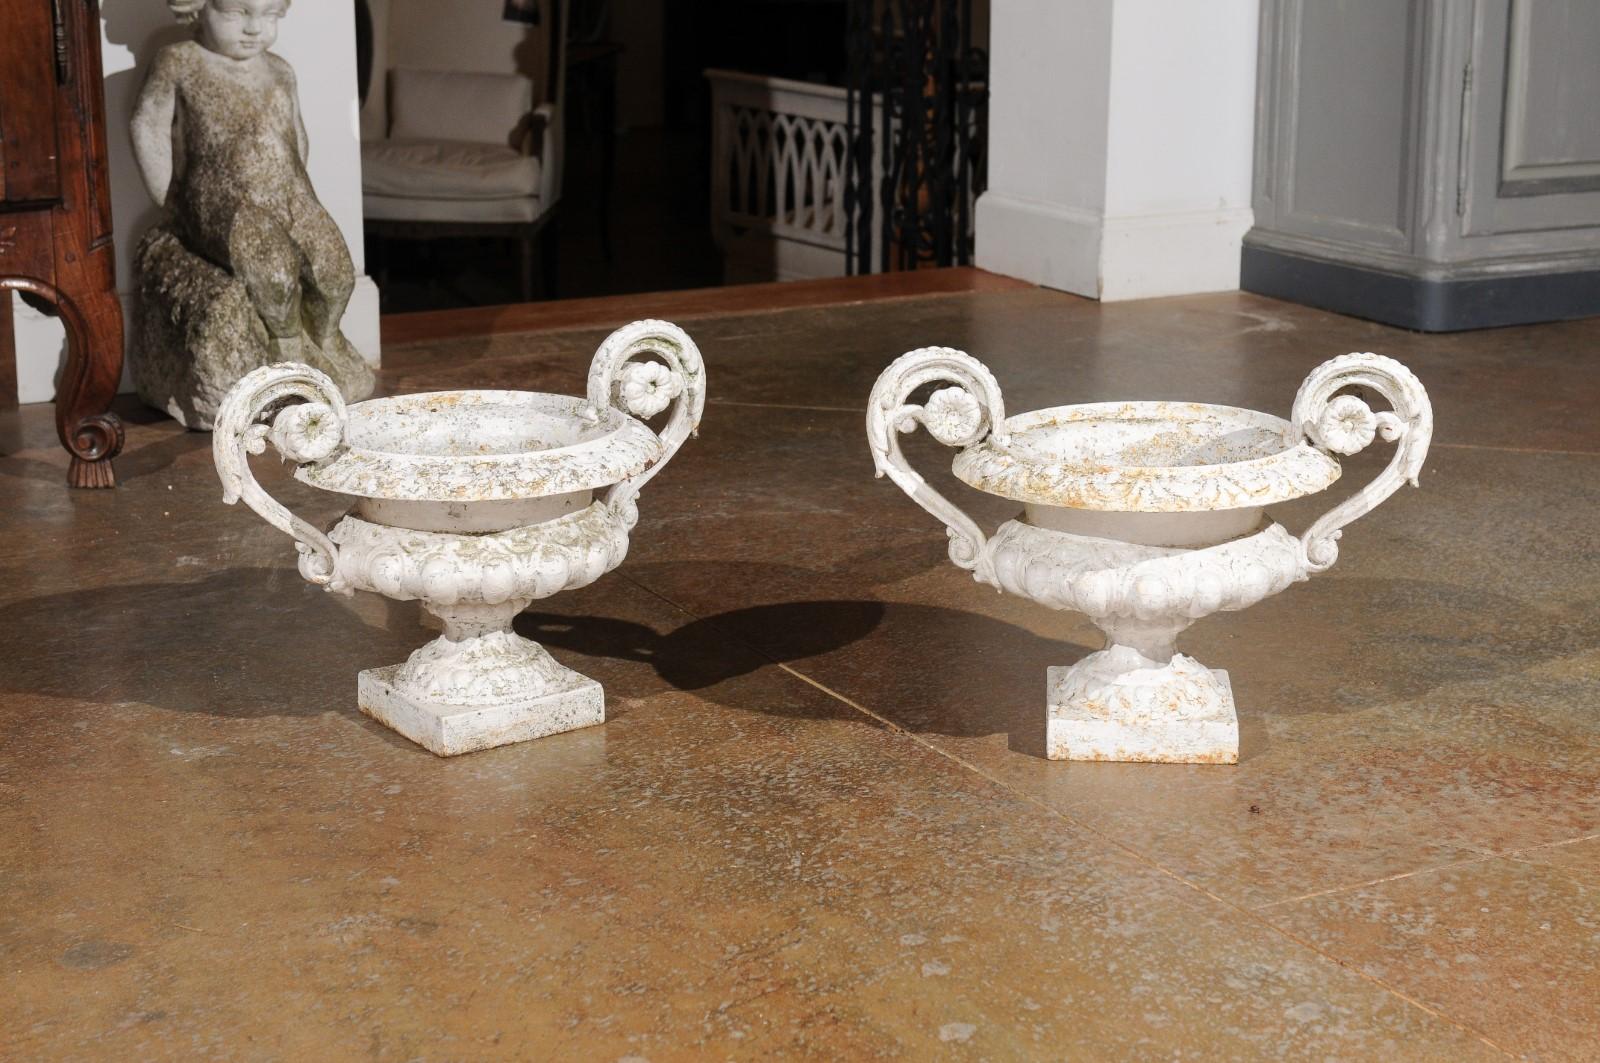 A pair of French cast iron vases from the 19th century, with white painted finish and large voluted handles. Created in France during the 19th century, each of this pair of vases draws our attention with its nicely weathered appearance and delicate